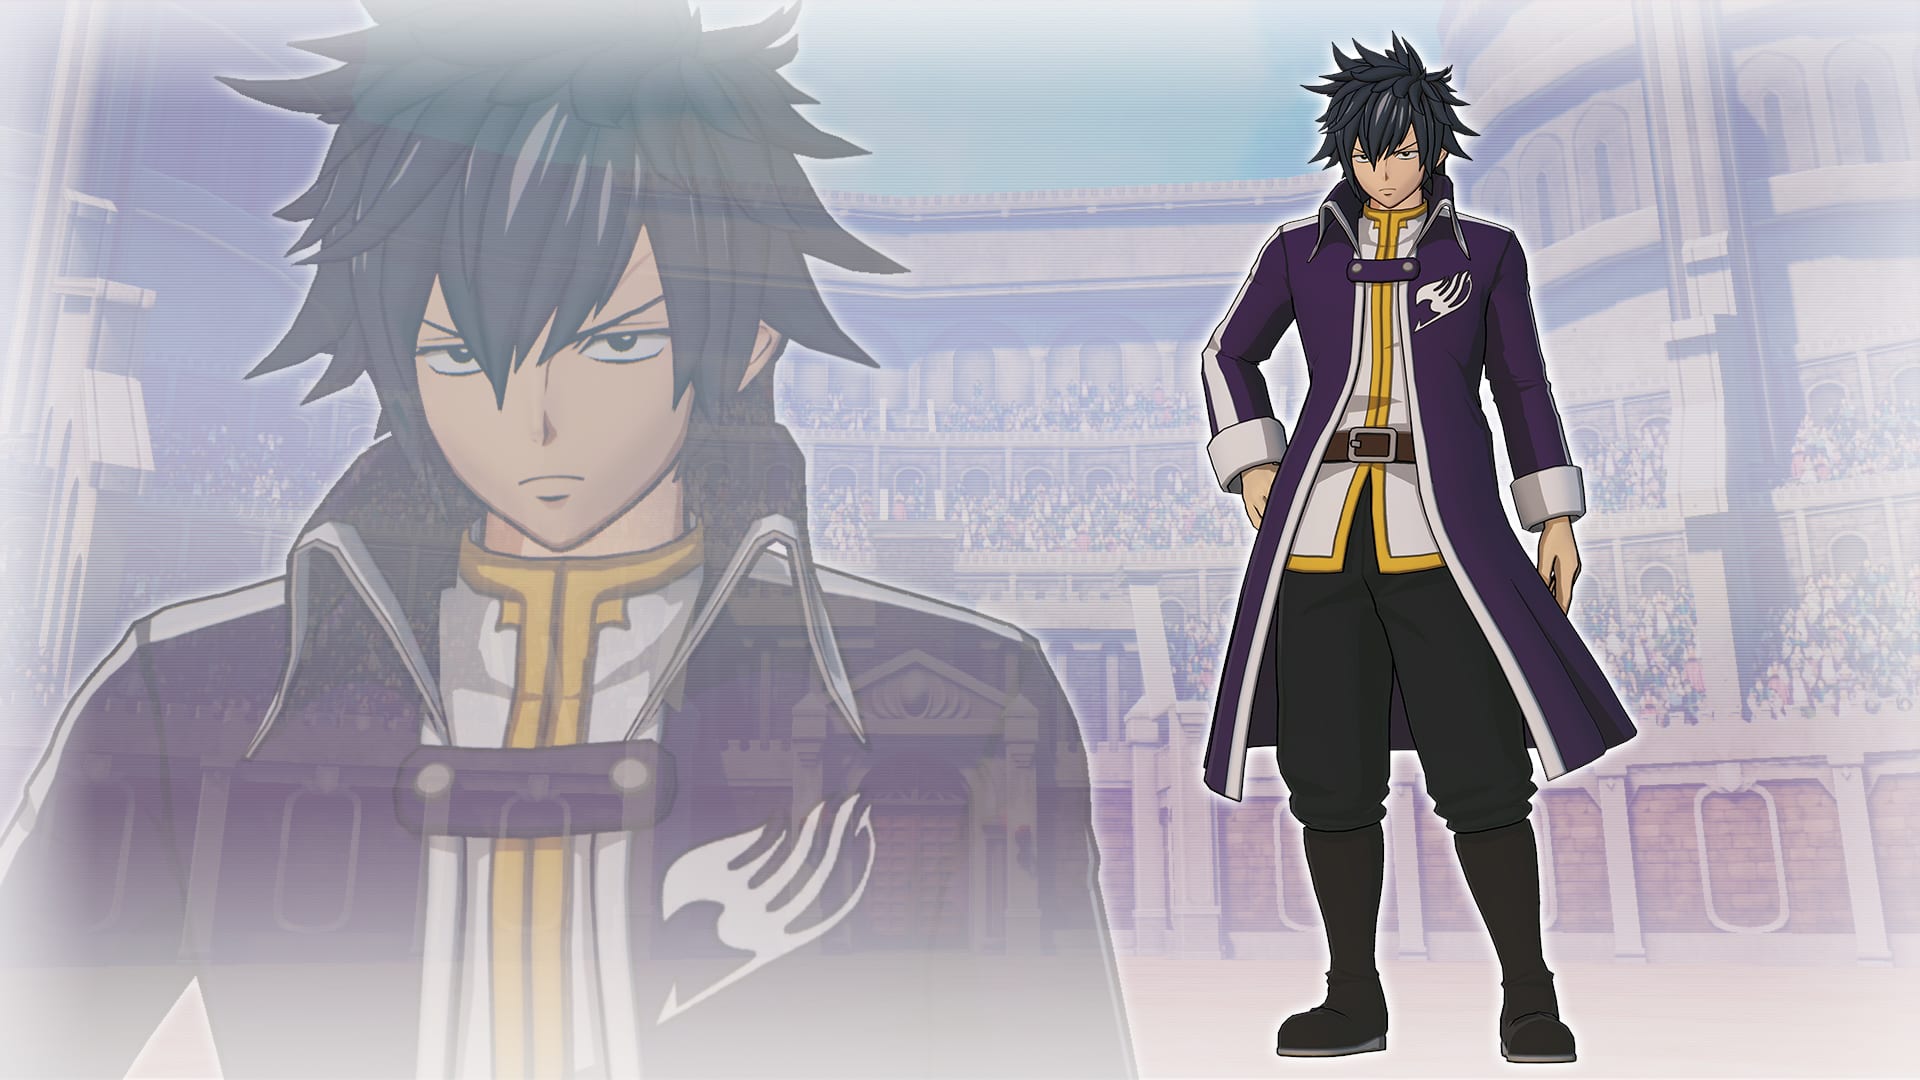 Gray's Costume "Fairy Tail Team A"